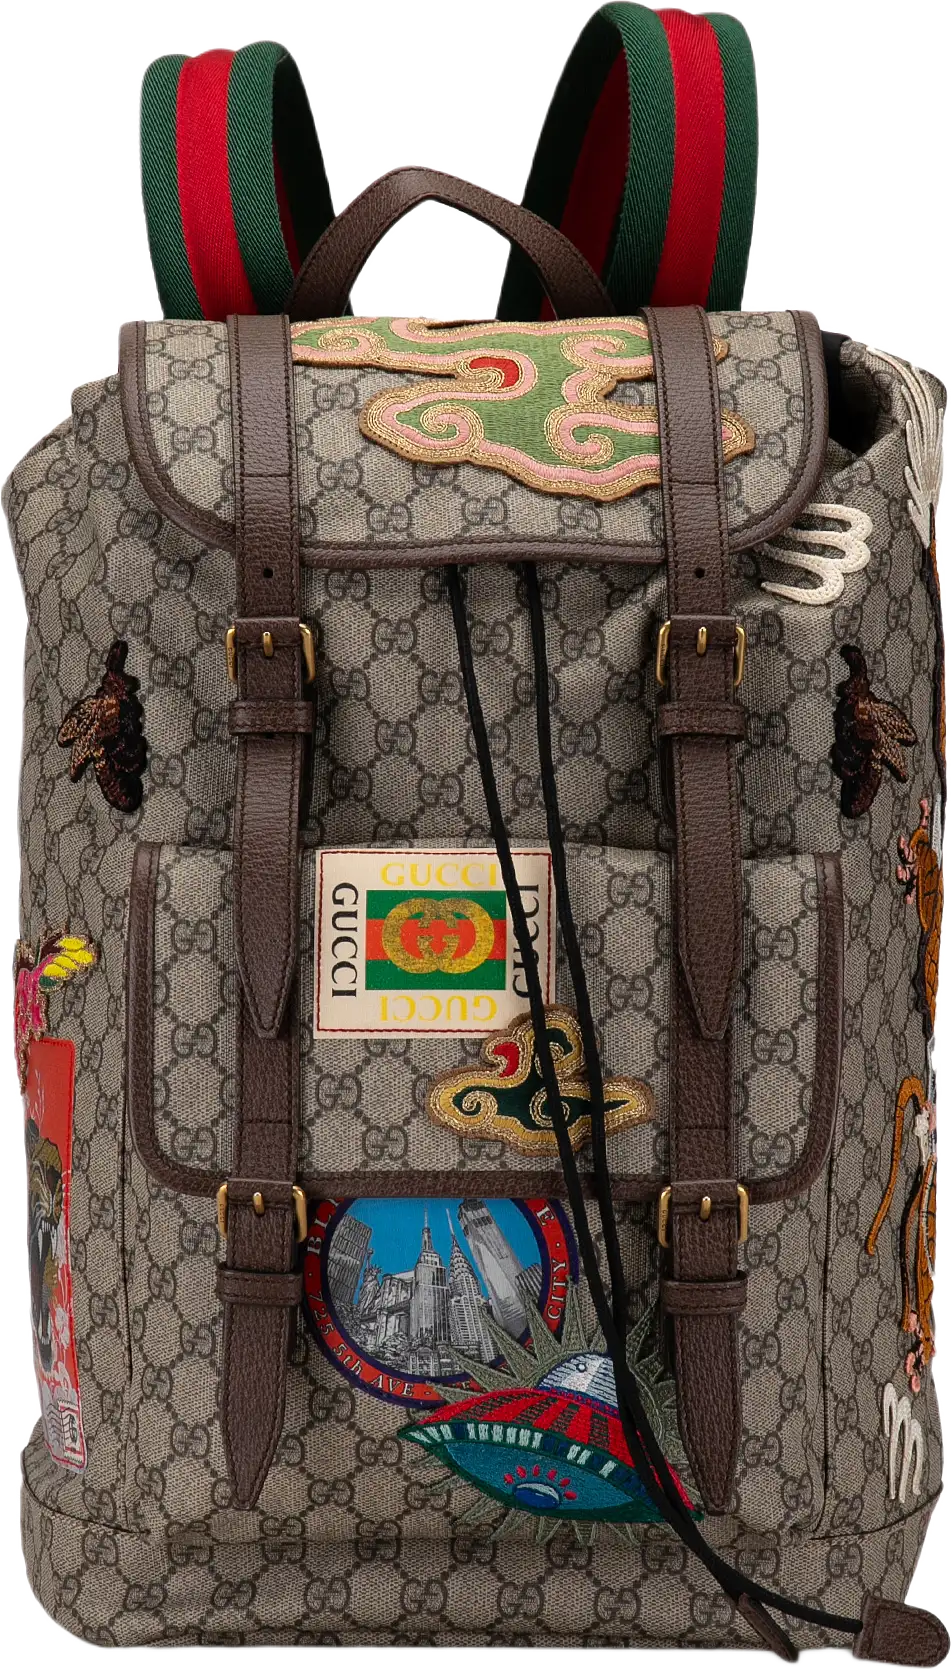 Gucci Gg Supreme Courrier Backpack